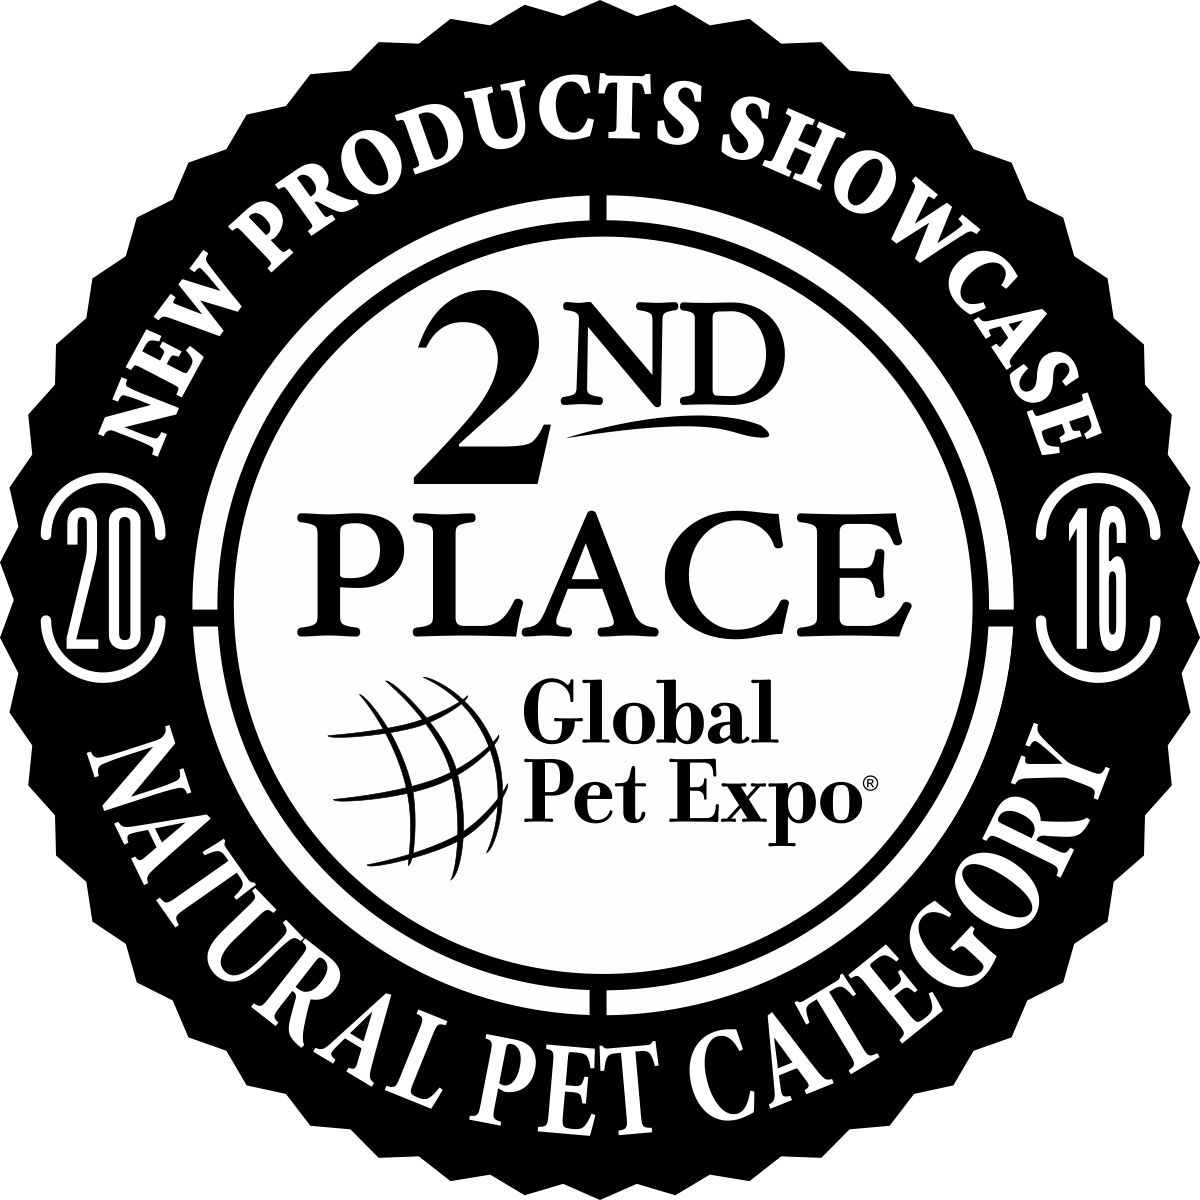 WHIMZEES Global Pet Expo 2016 New Product Showcase Award Natural